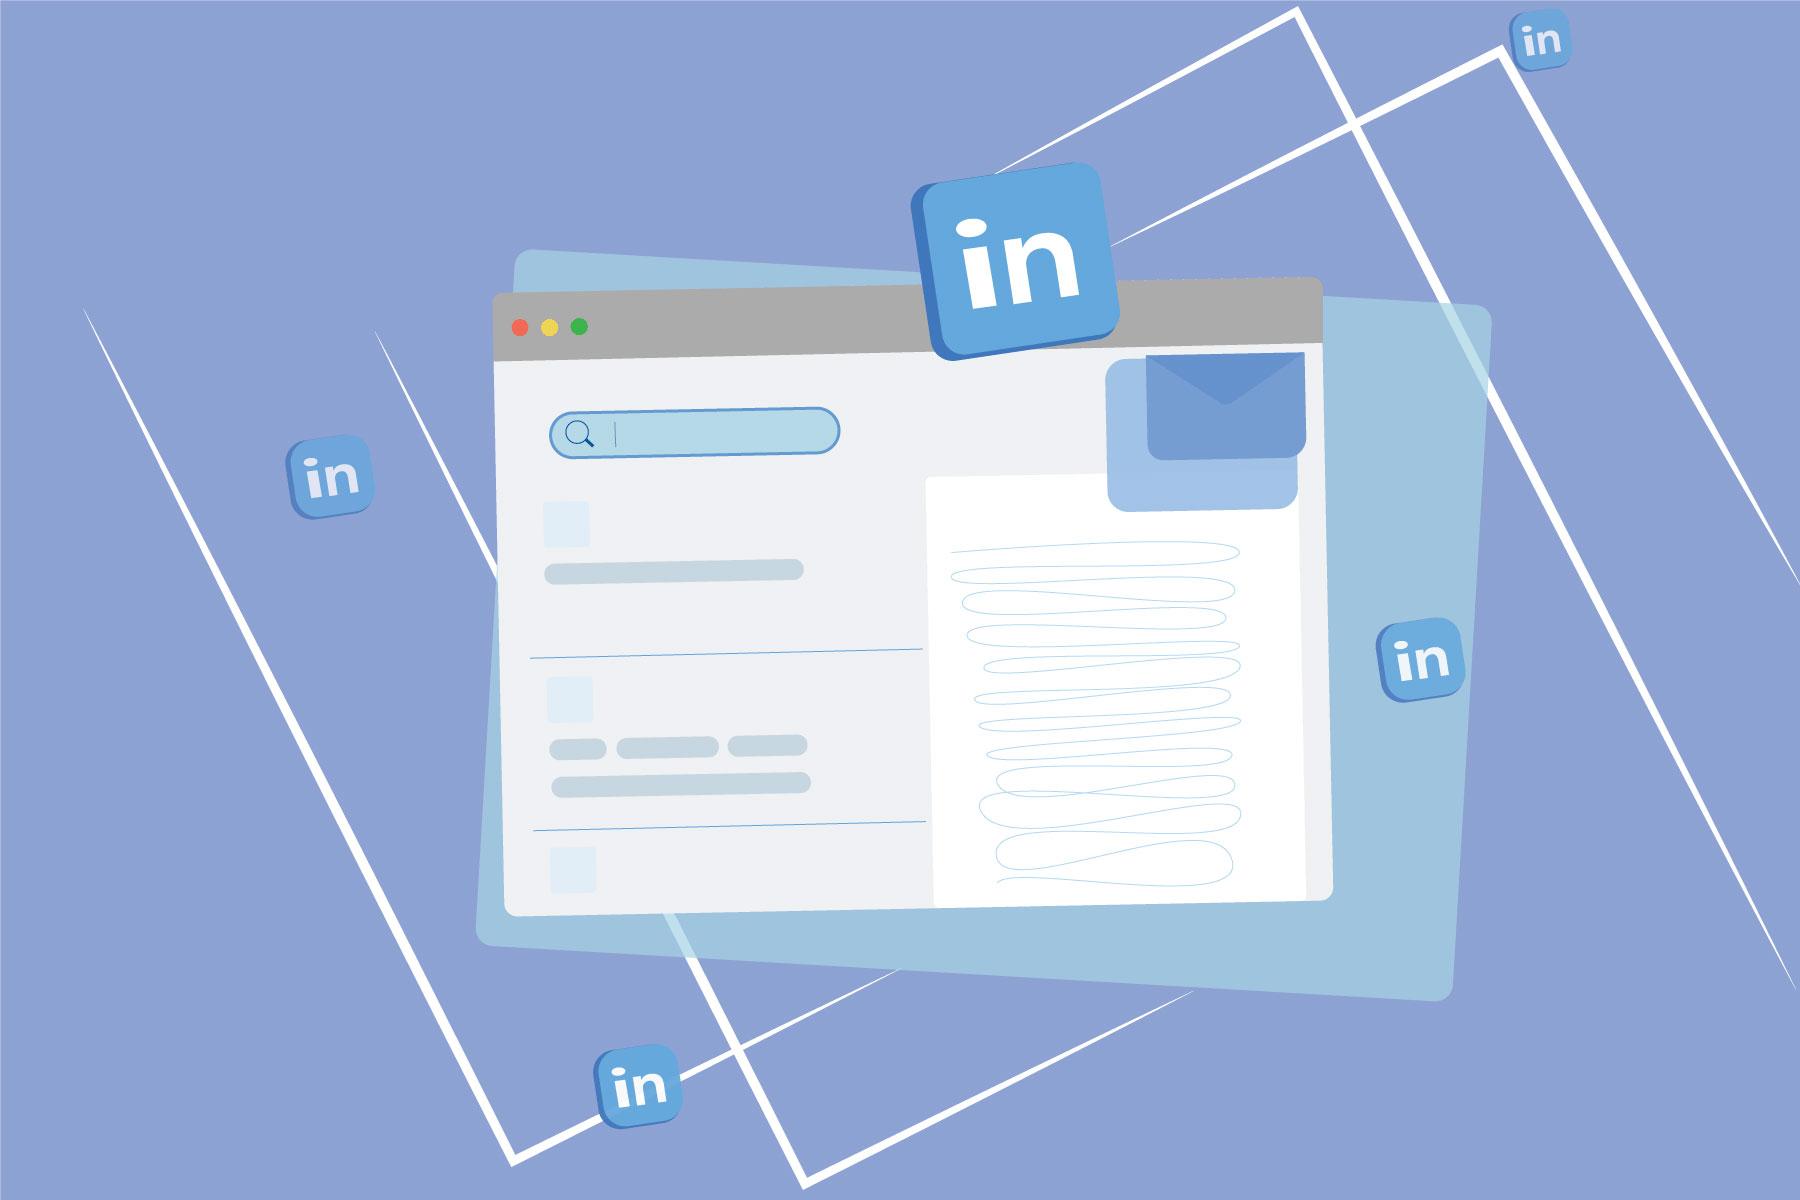 In an article about LinkedIn, the social media user interface of the website floats over a blue background.